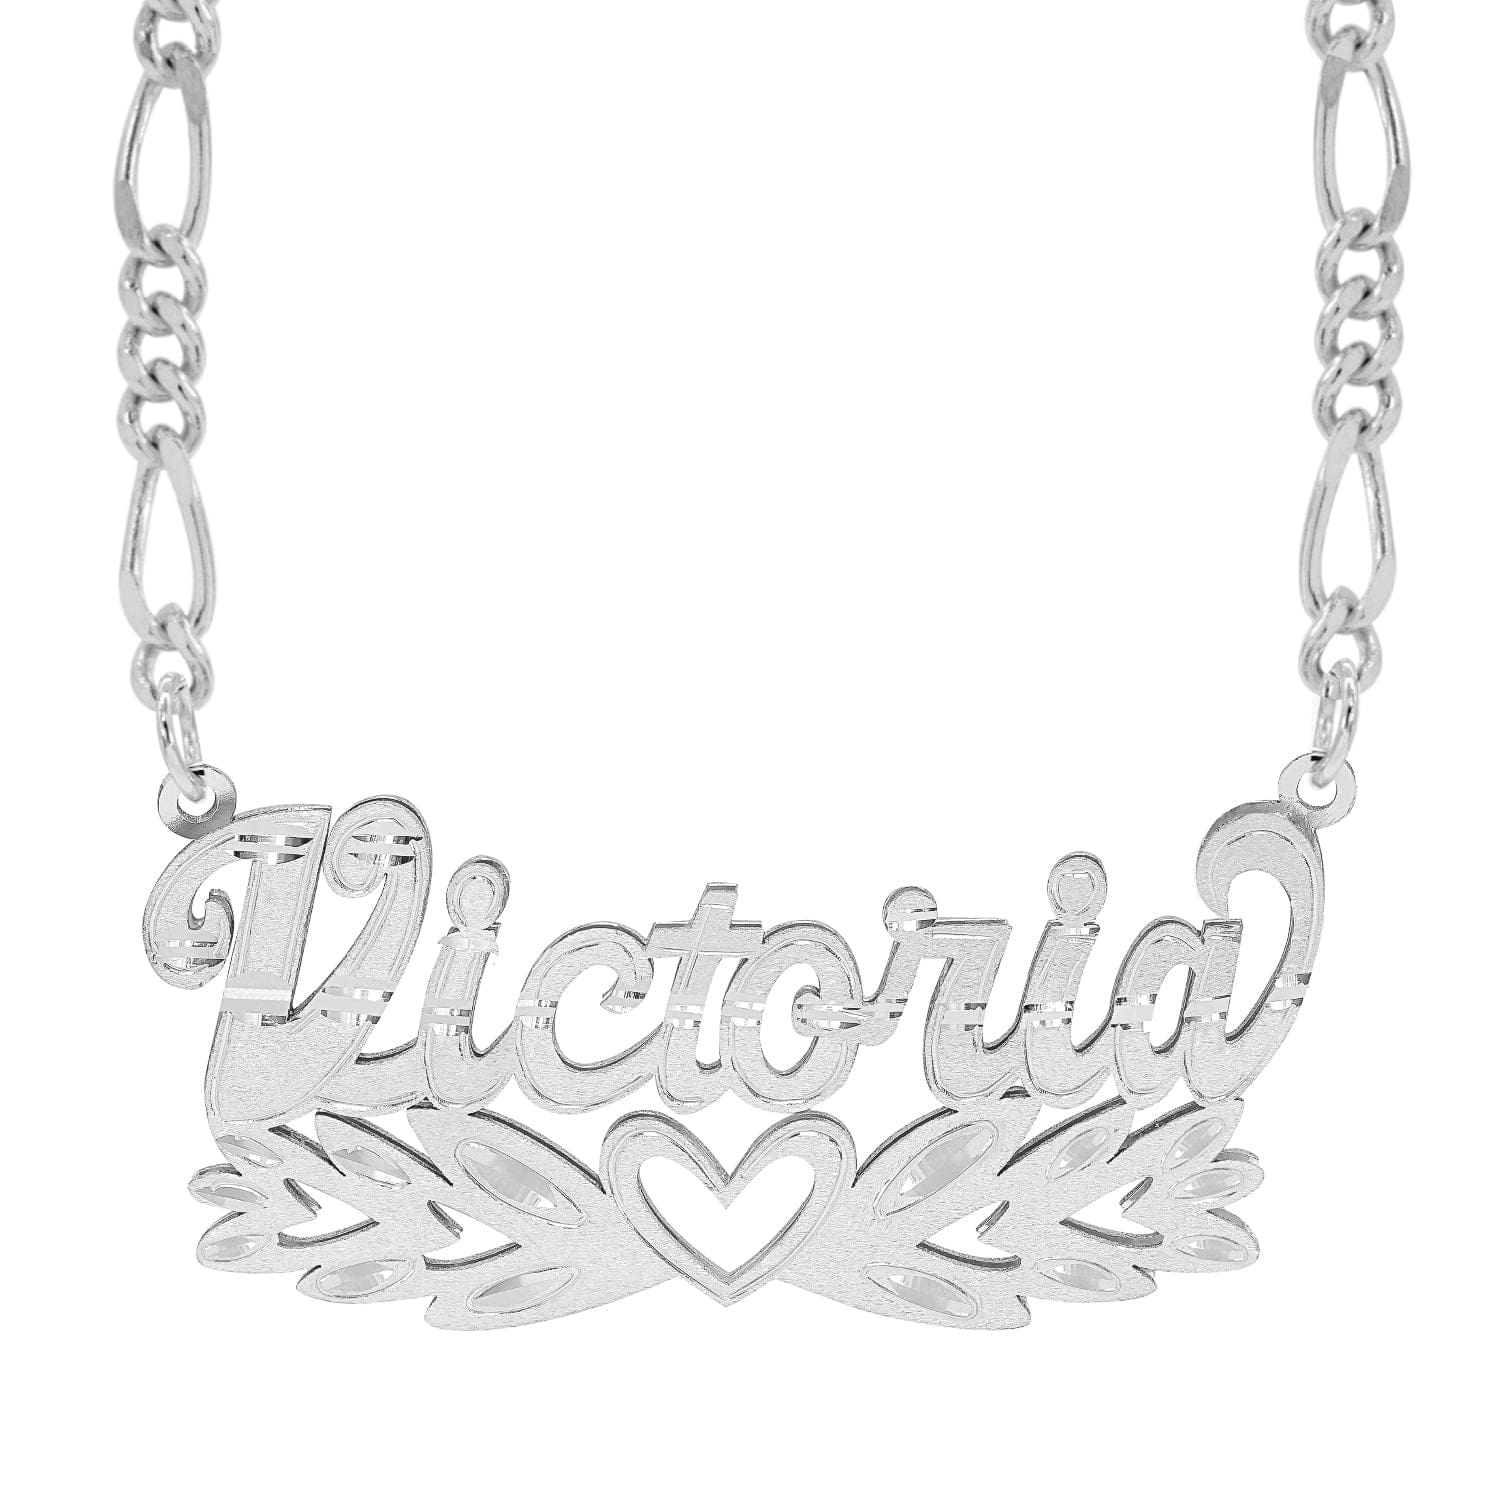 14K Gold over Sterling Silver / Figaro chain Personalized Double Nameplate Necklace "Victoria" with Figaro chain